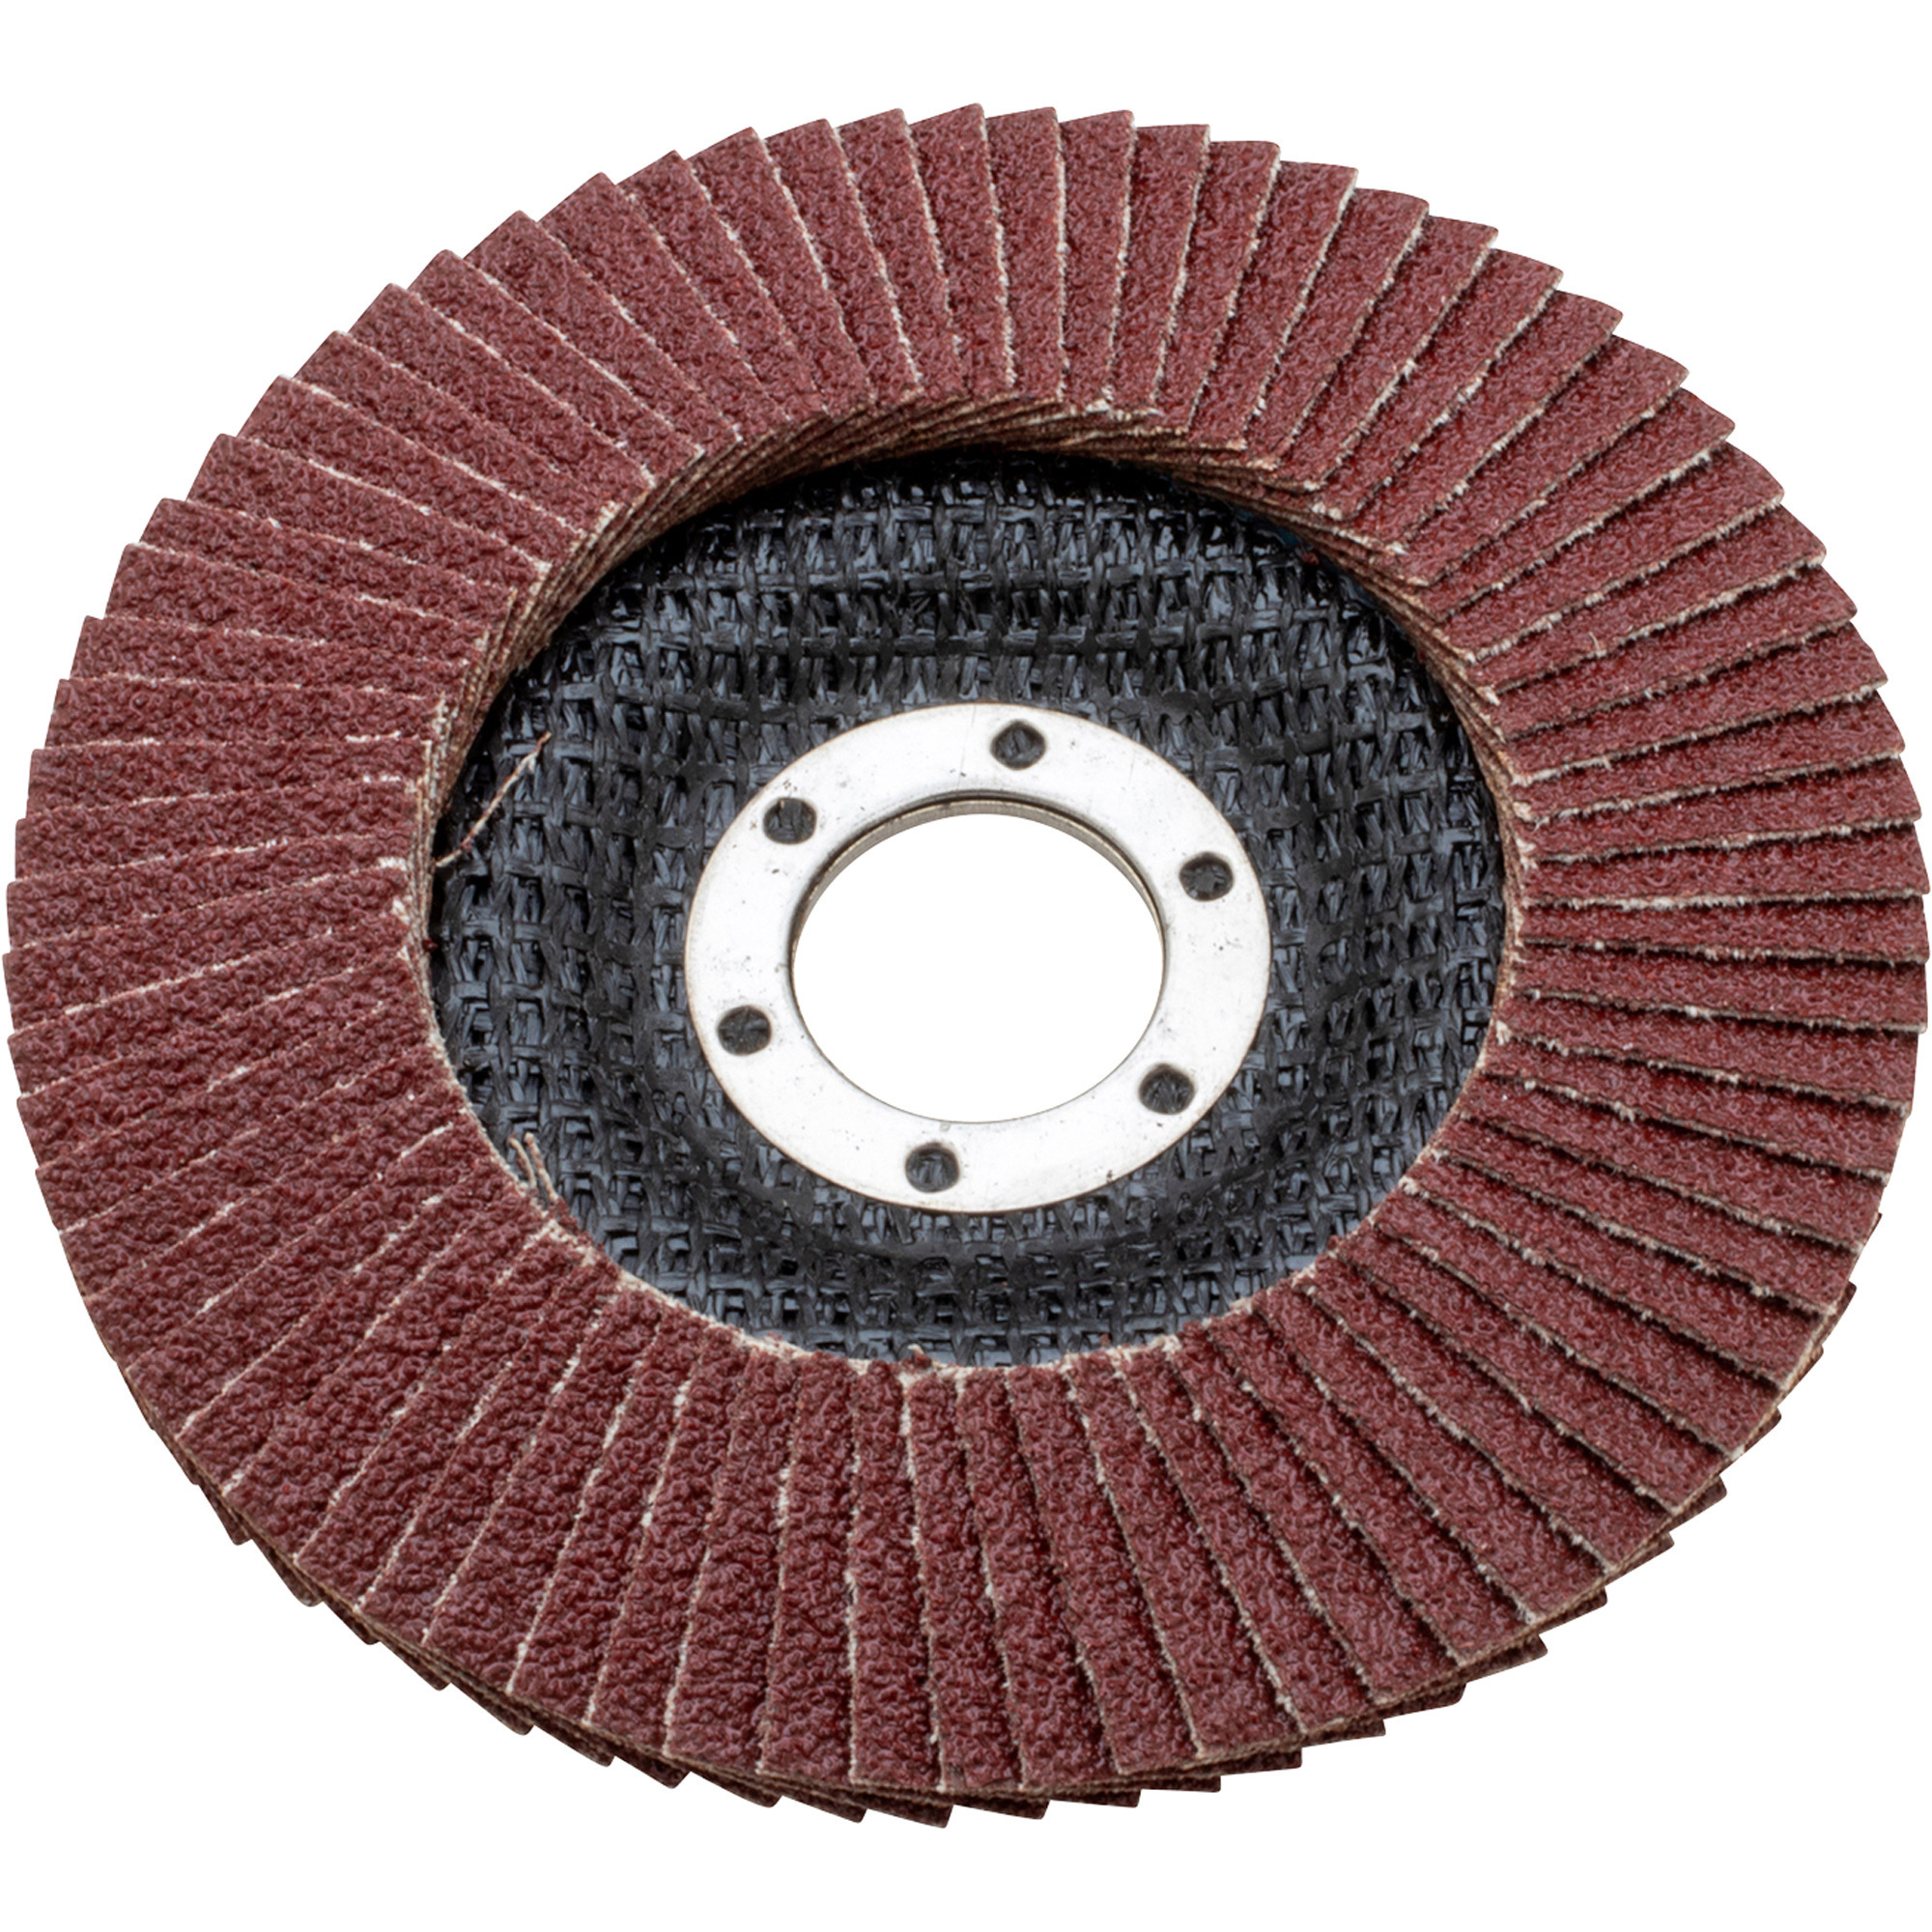 Lincoln Electric Grinding Flap Disc, 4.5in. Dia, 60 Grit, Model# KH164